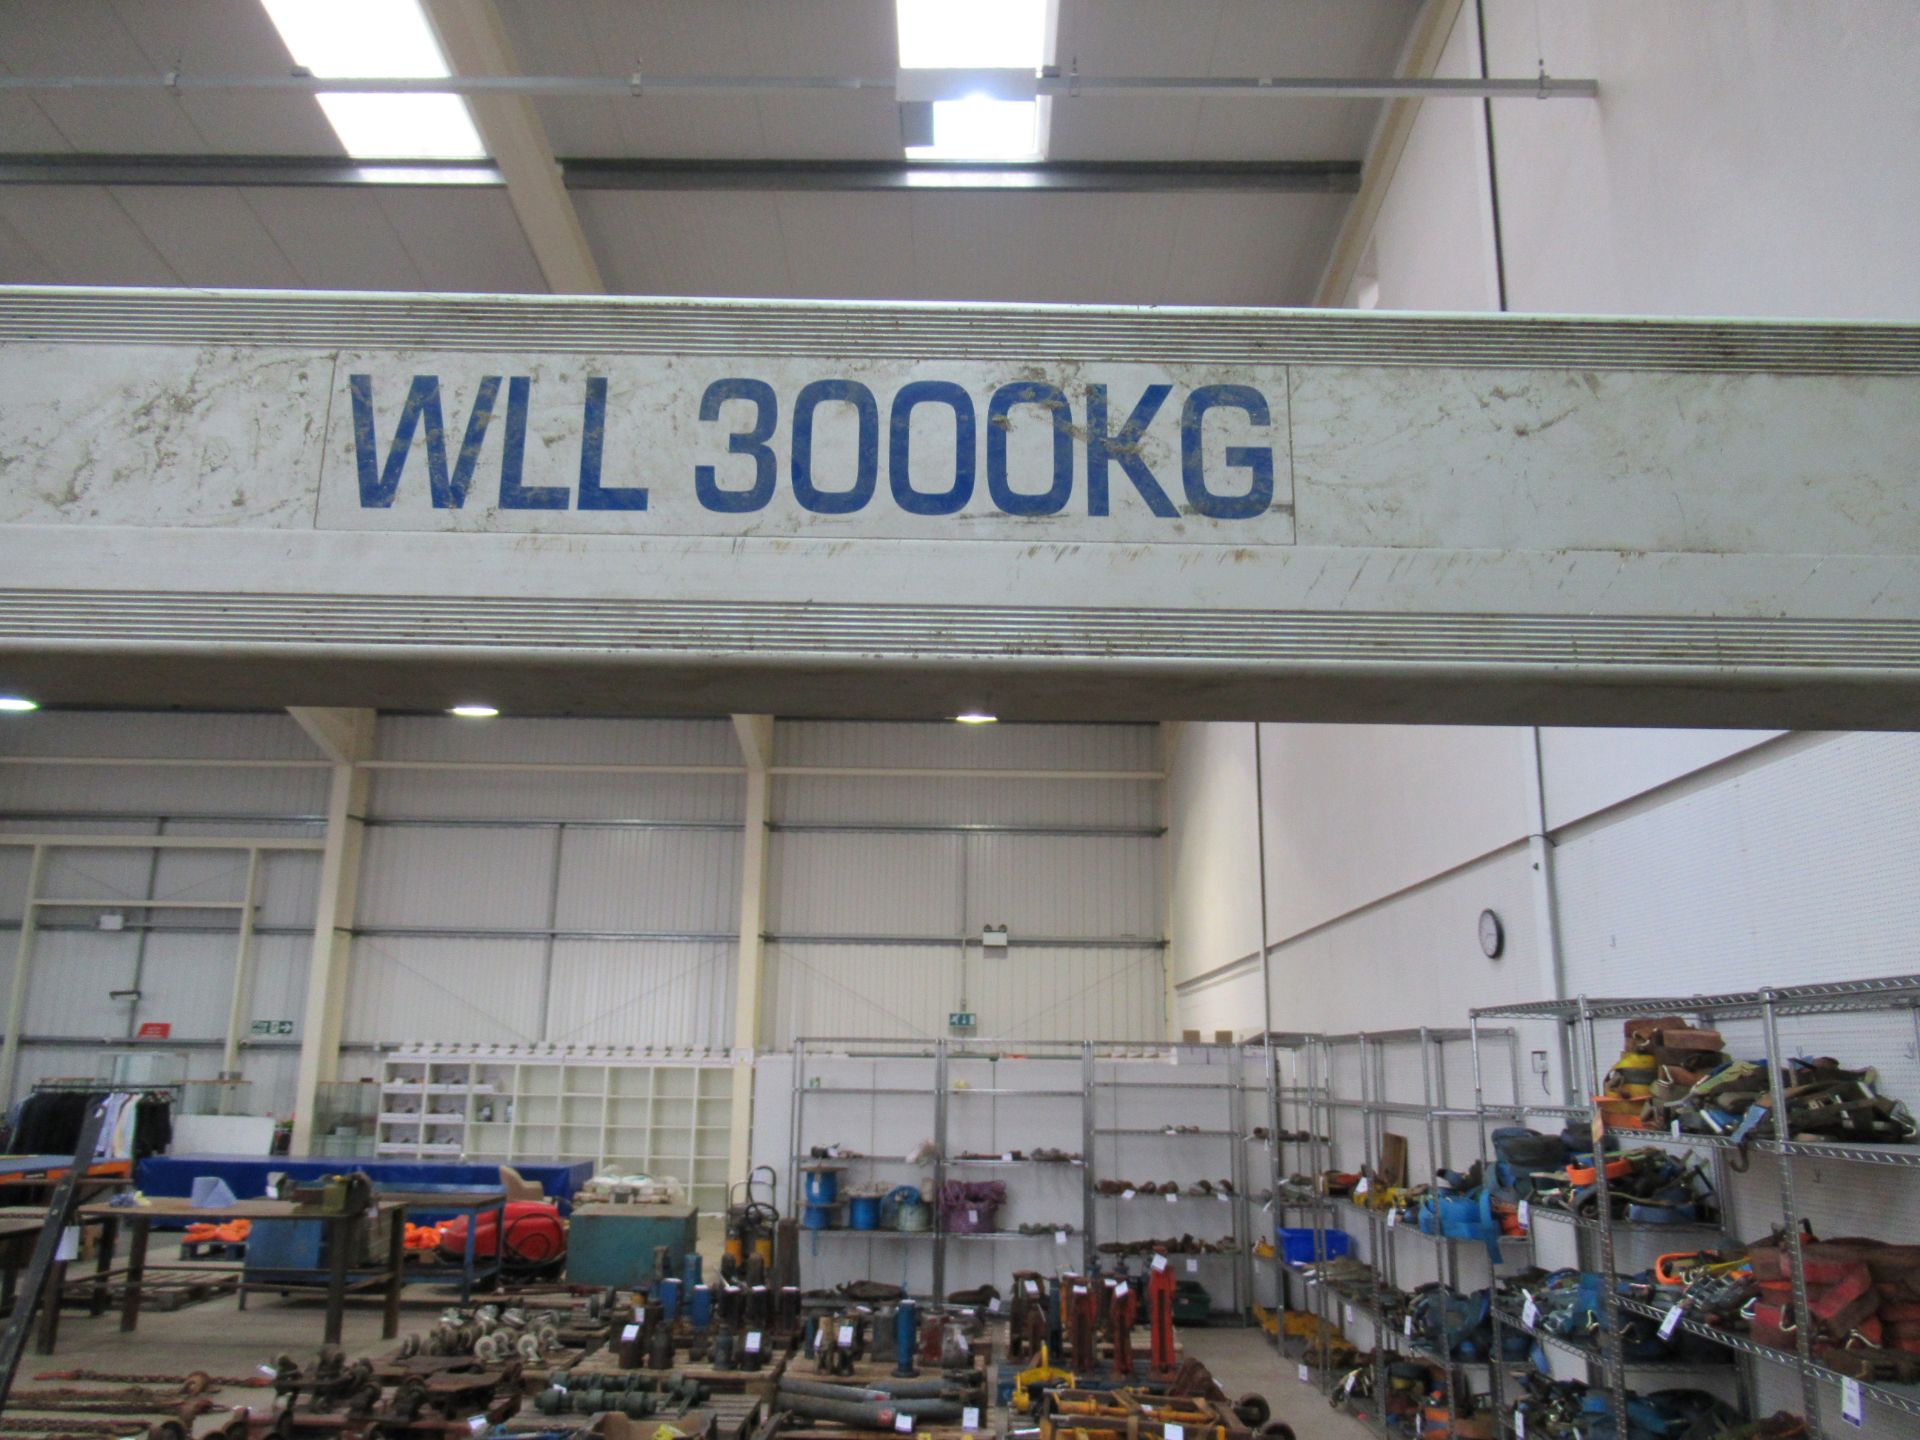 Reid Lifting Porta-Gantry 3000kg WLL with Yale Lift 360 Hand Chain Hoist, 3000kg WLL Please note - Image 3 of 6